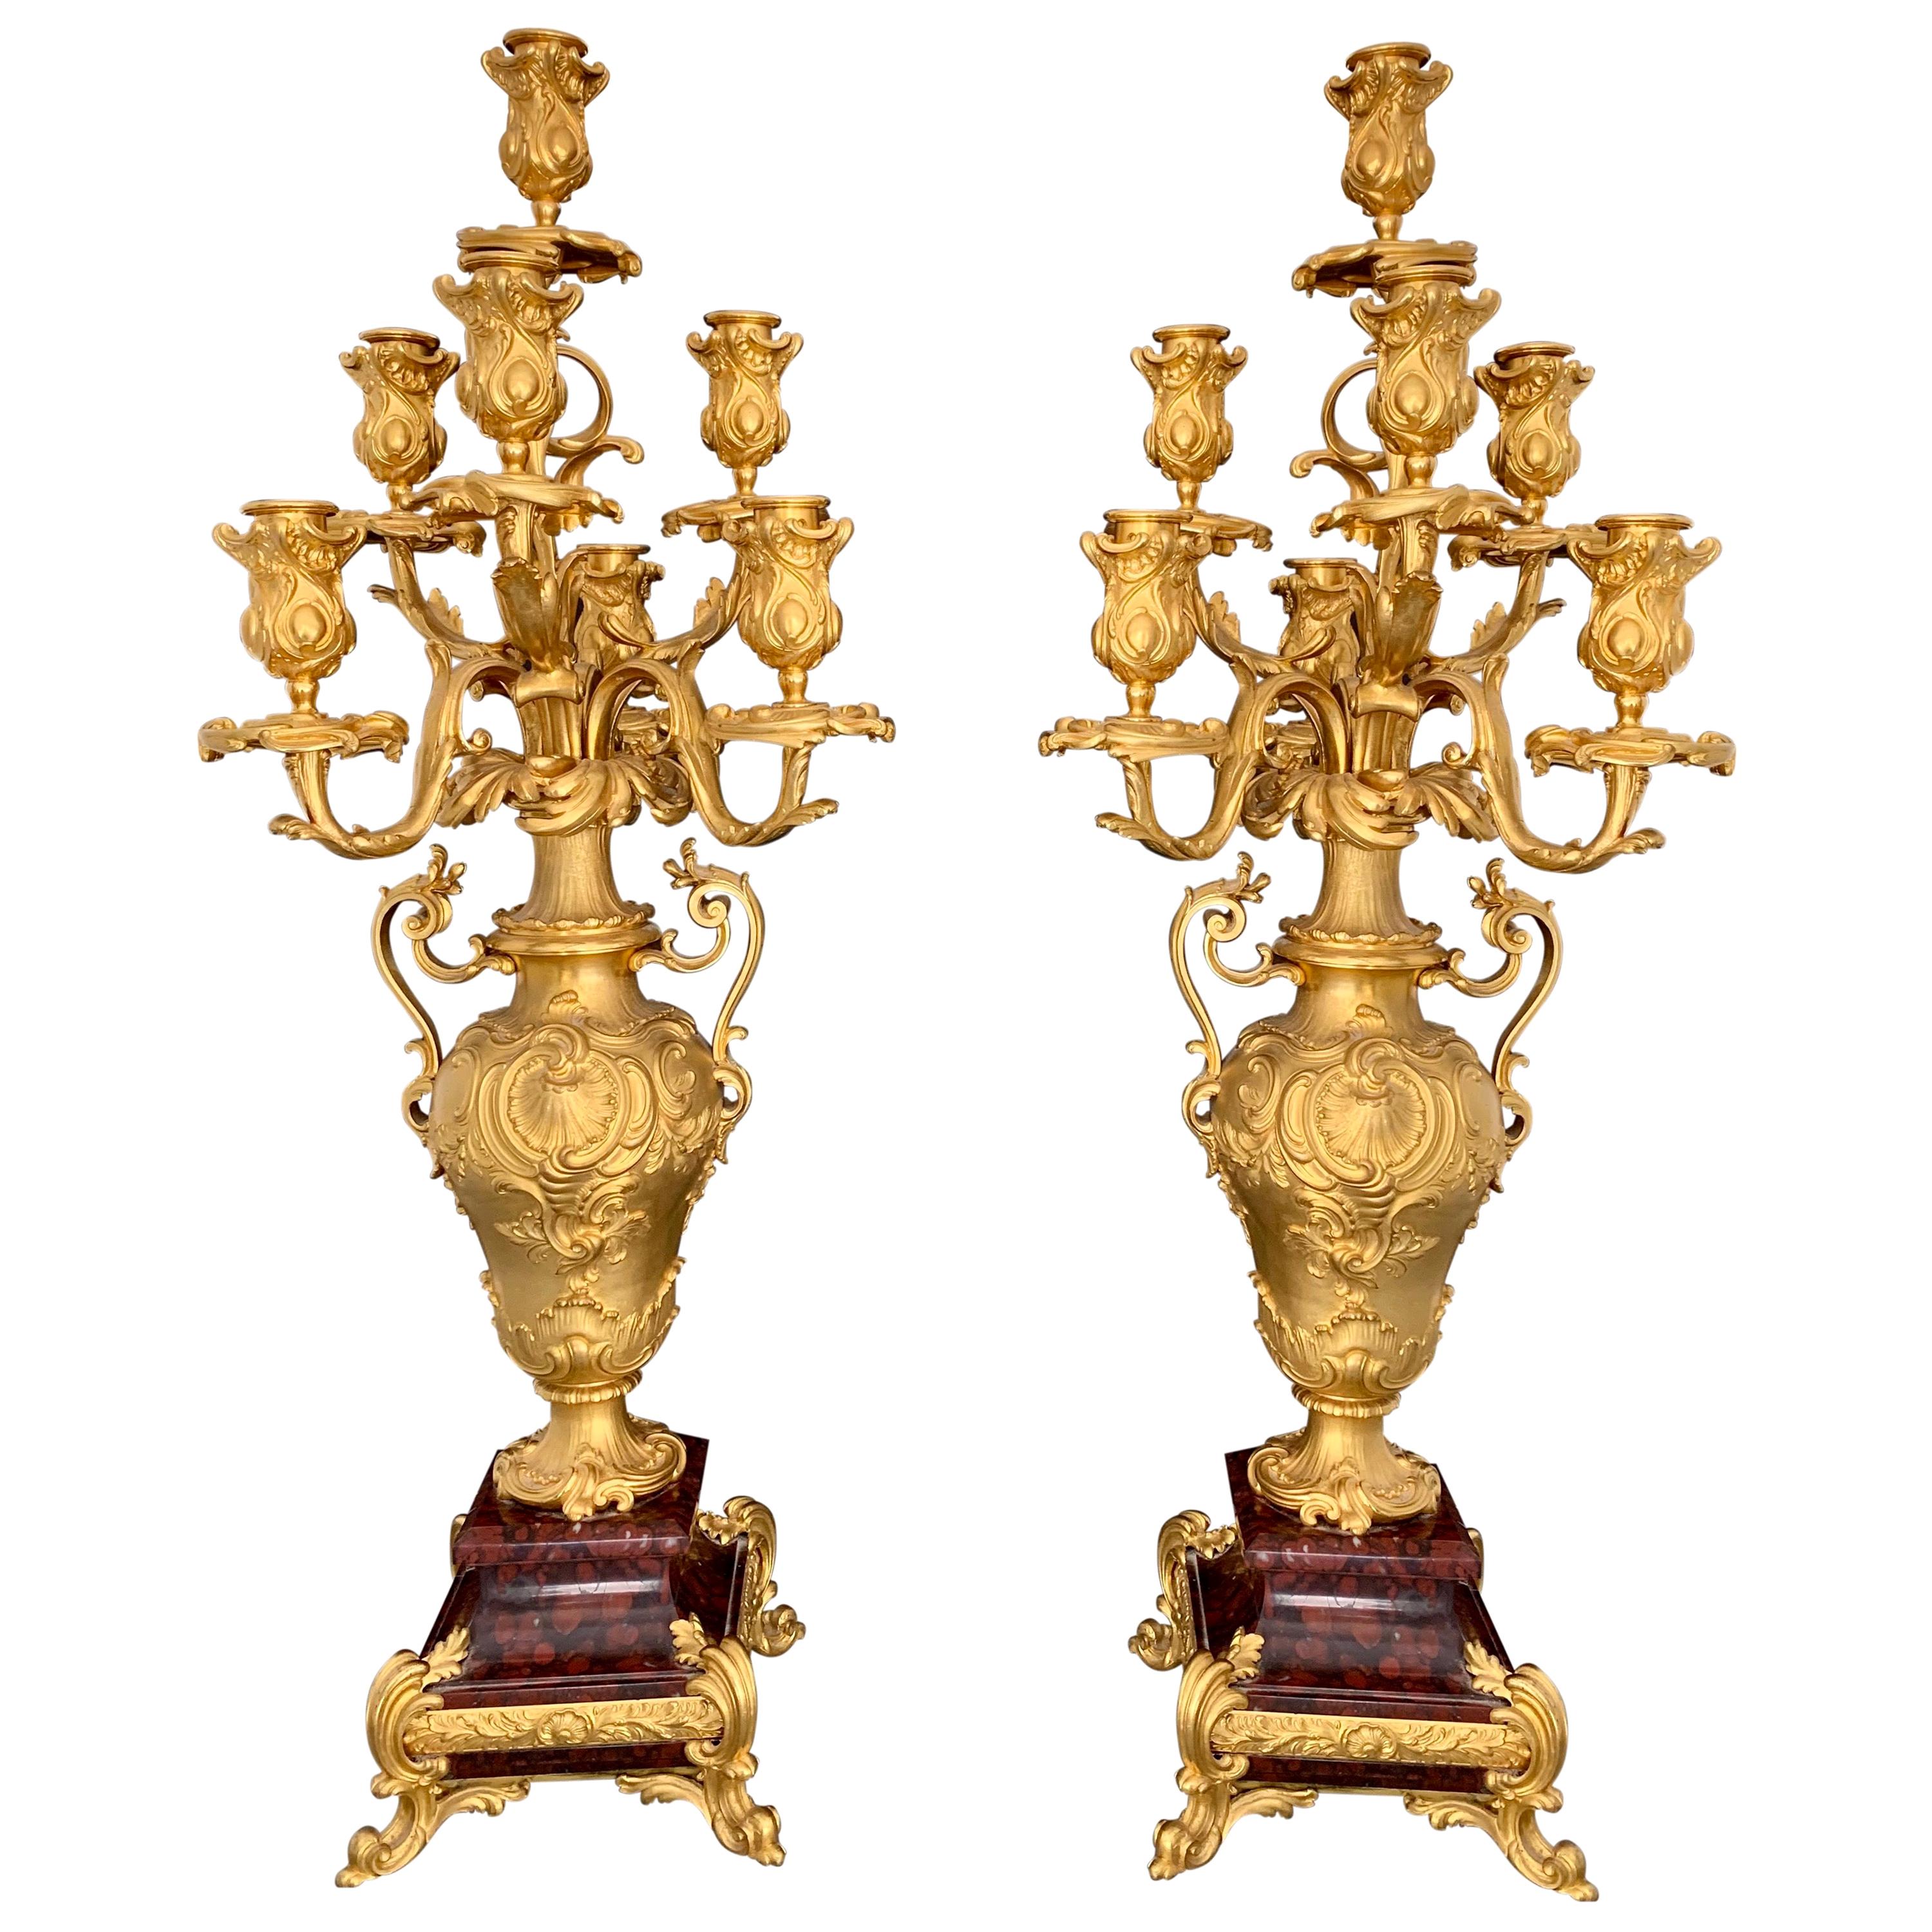 Pair of 19th Century French Ormolu Candelabras by Barbedienne For Sale